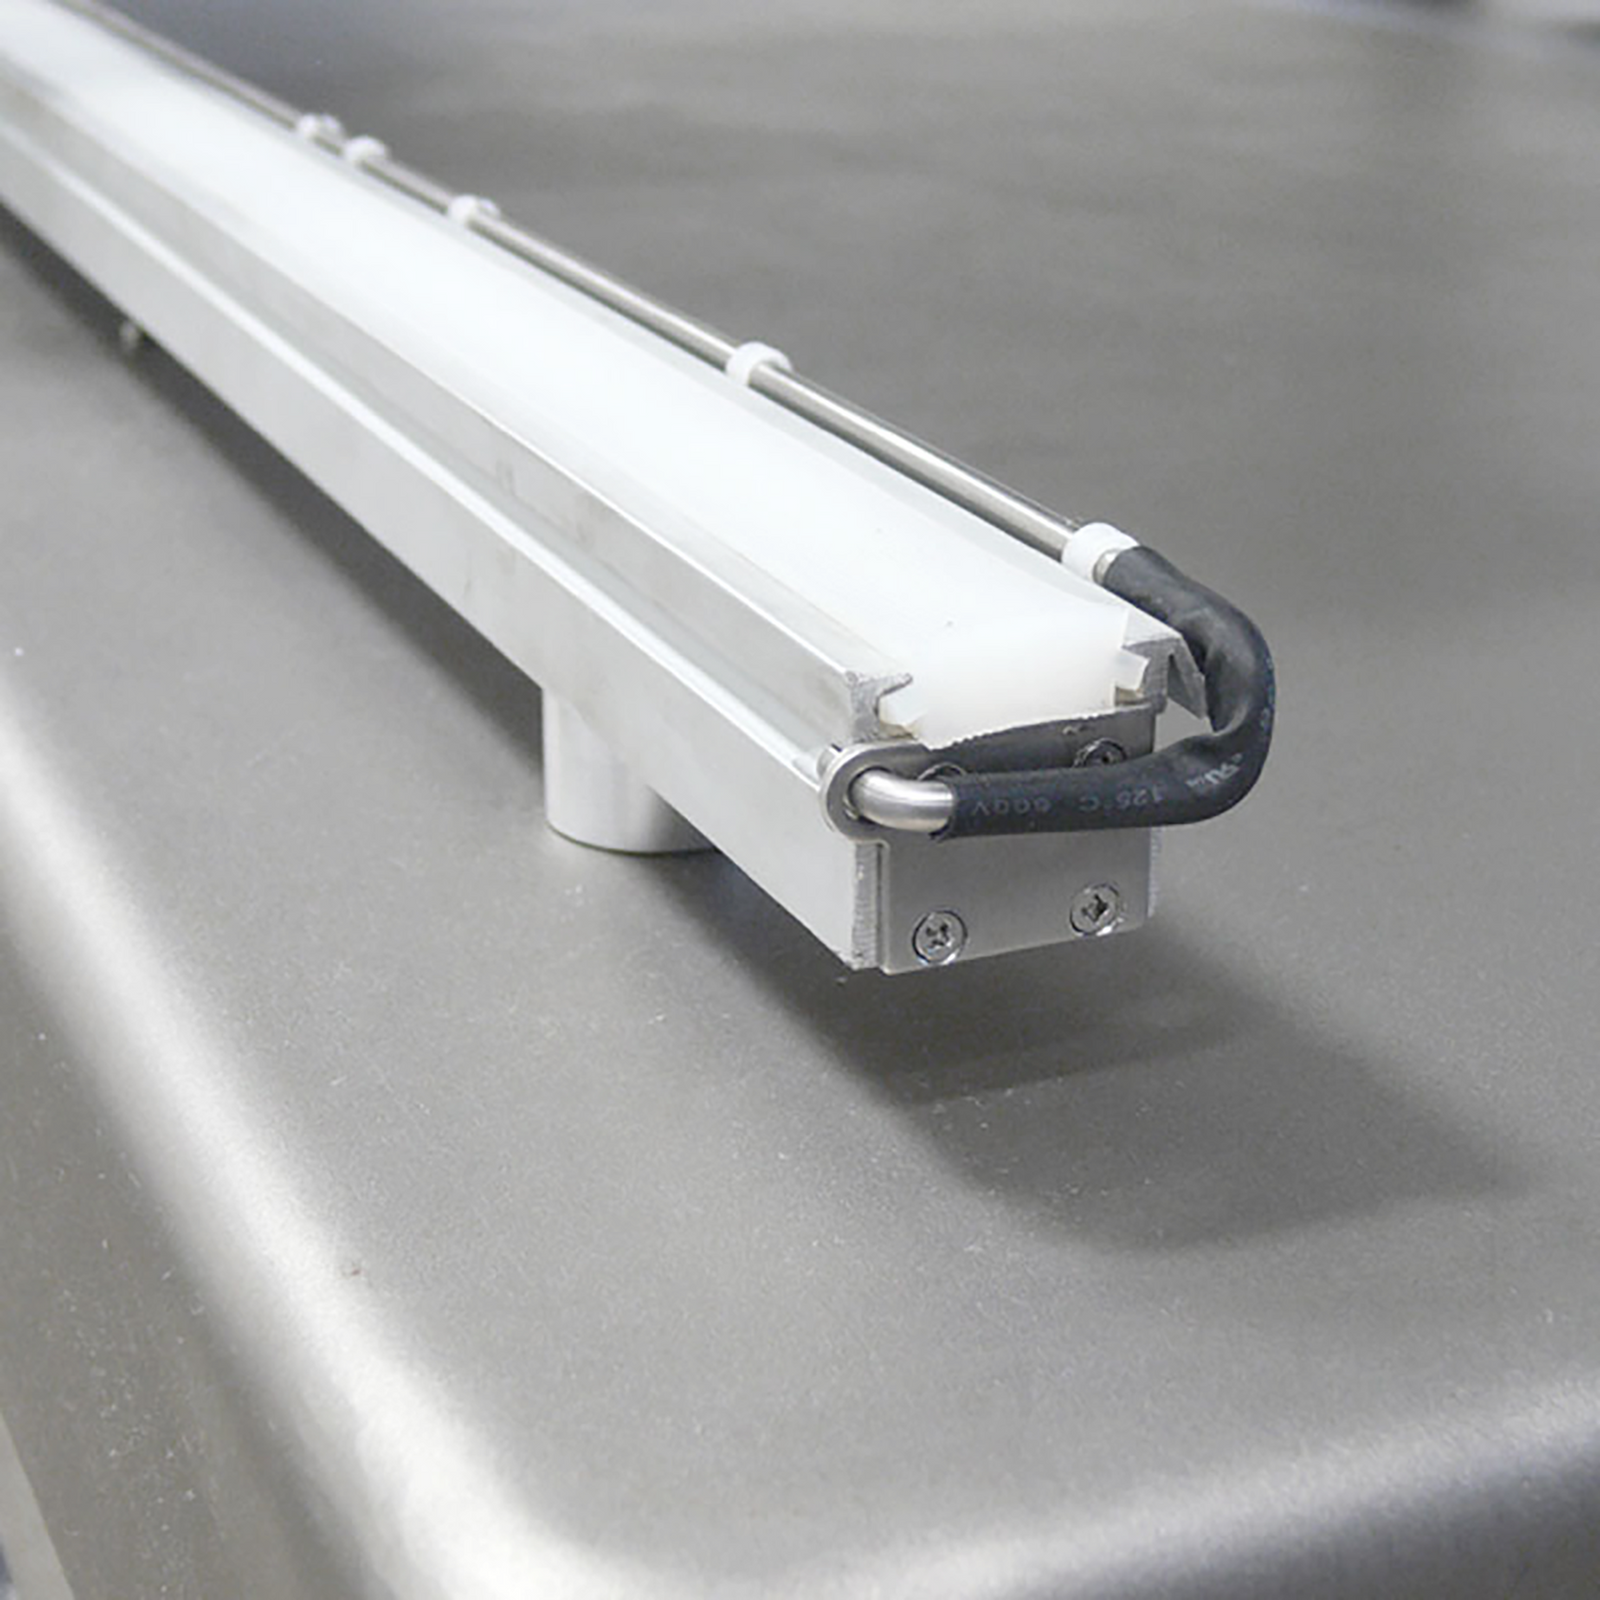 32 inch seal bar of the heavy duty doble chamber vacuum sealer